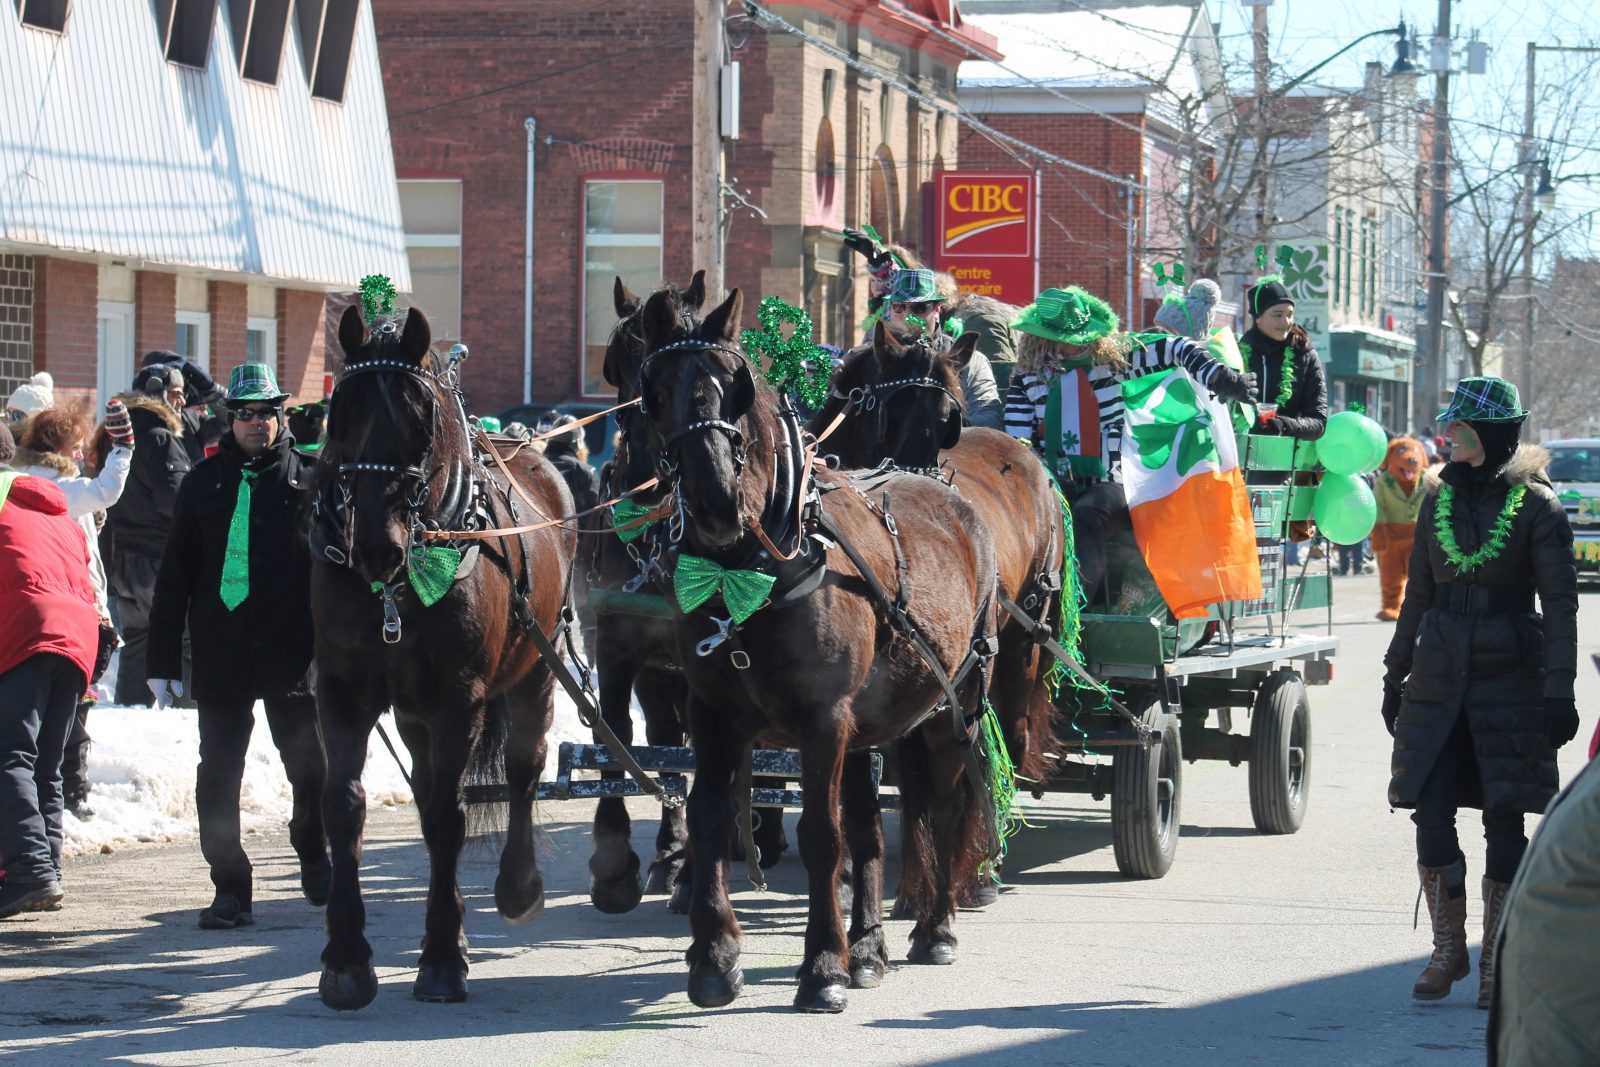 Annual St. Patrick’s Day parade in Richmond